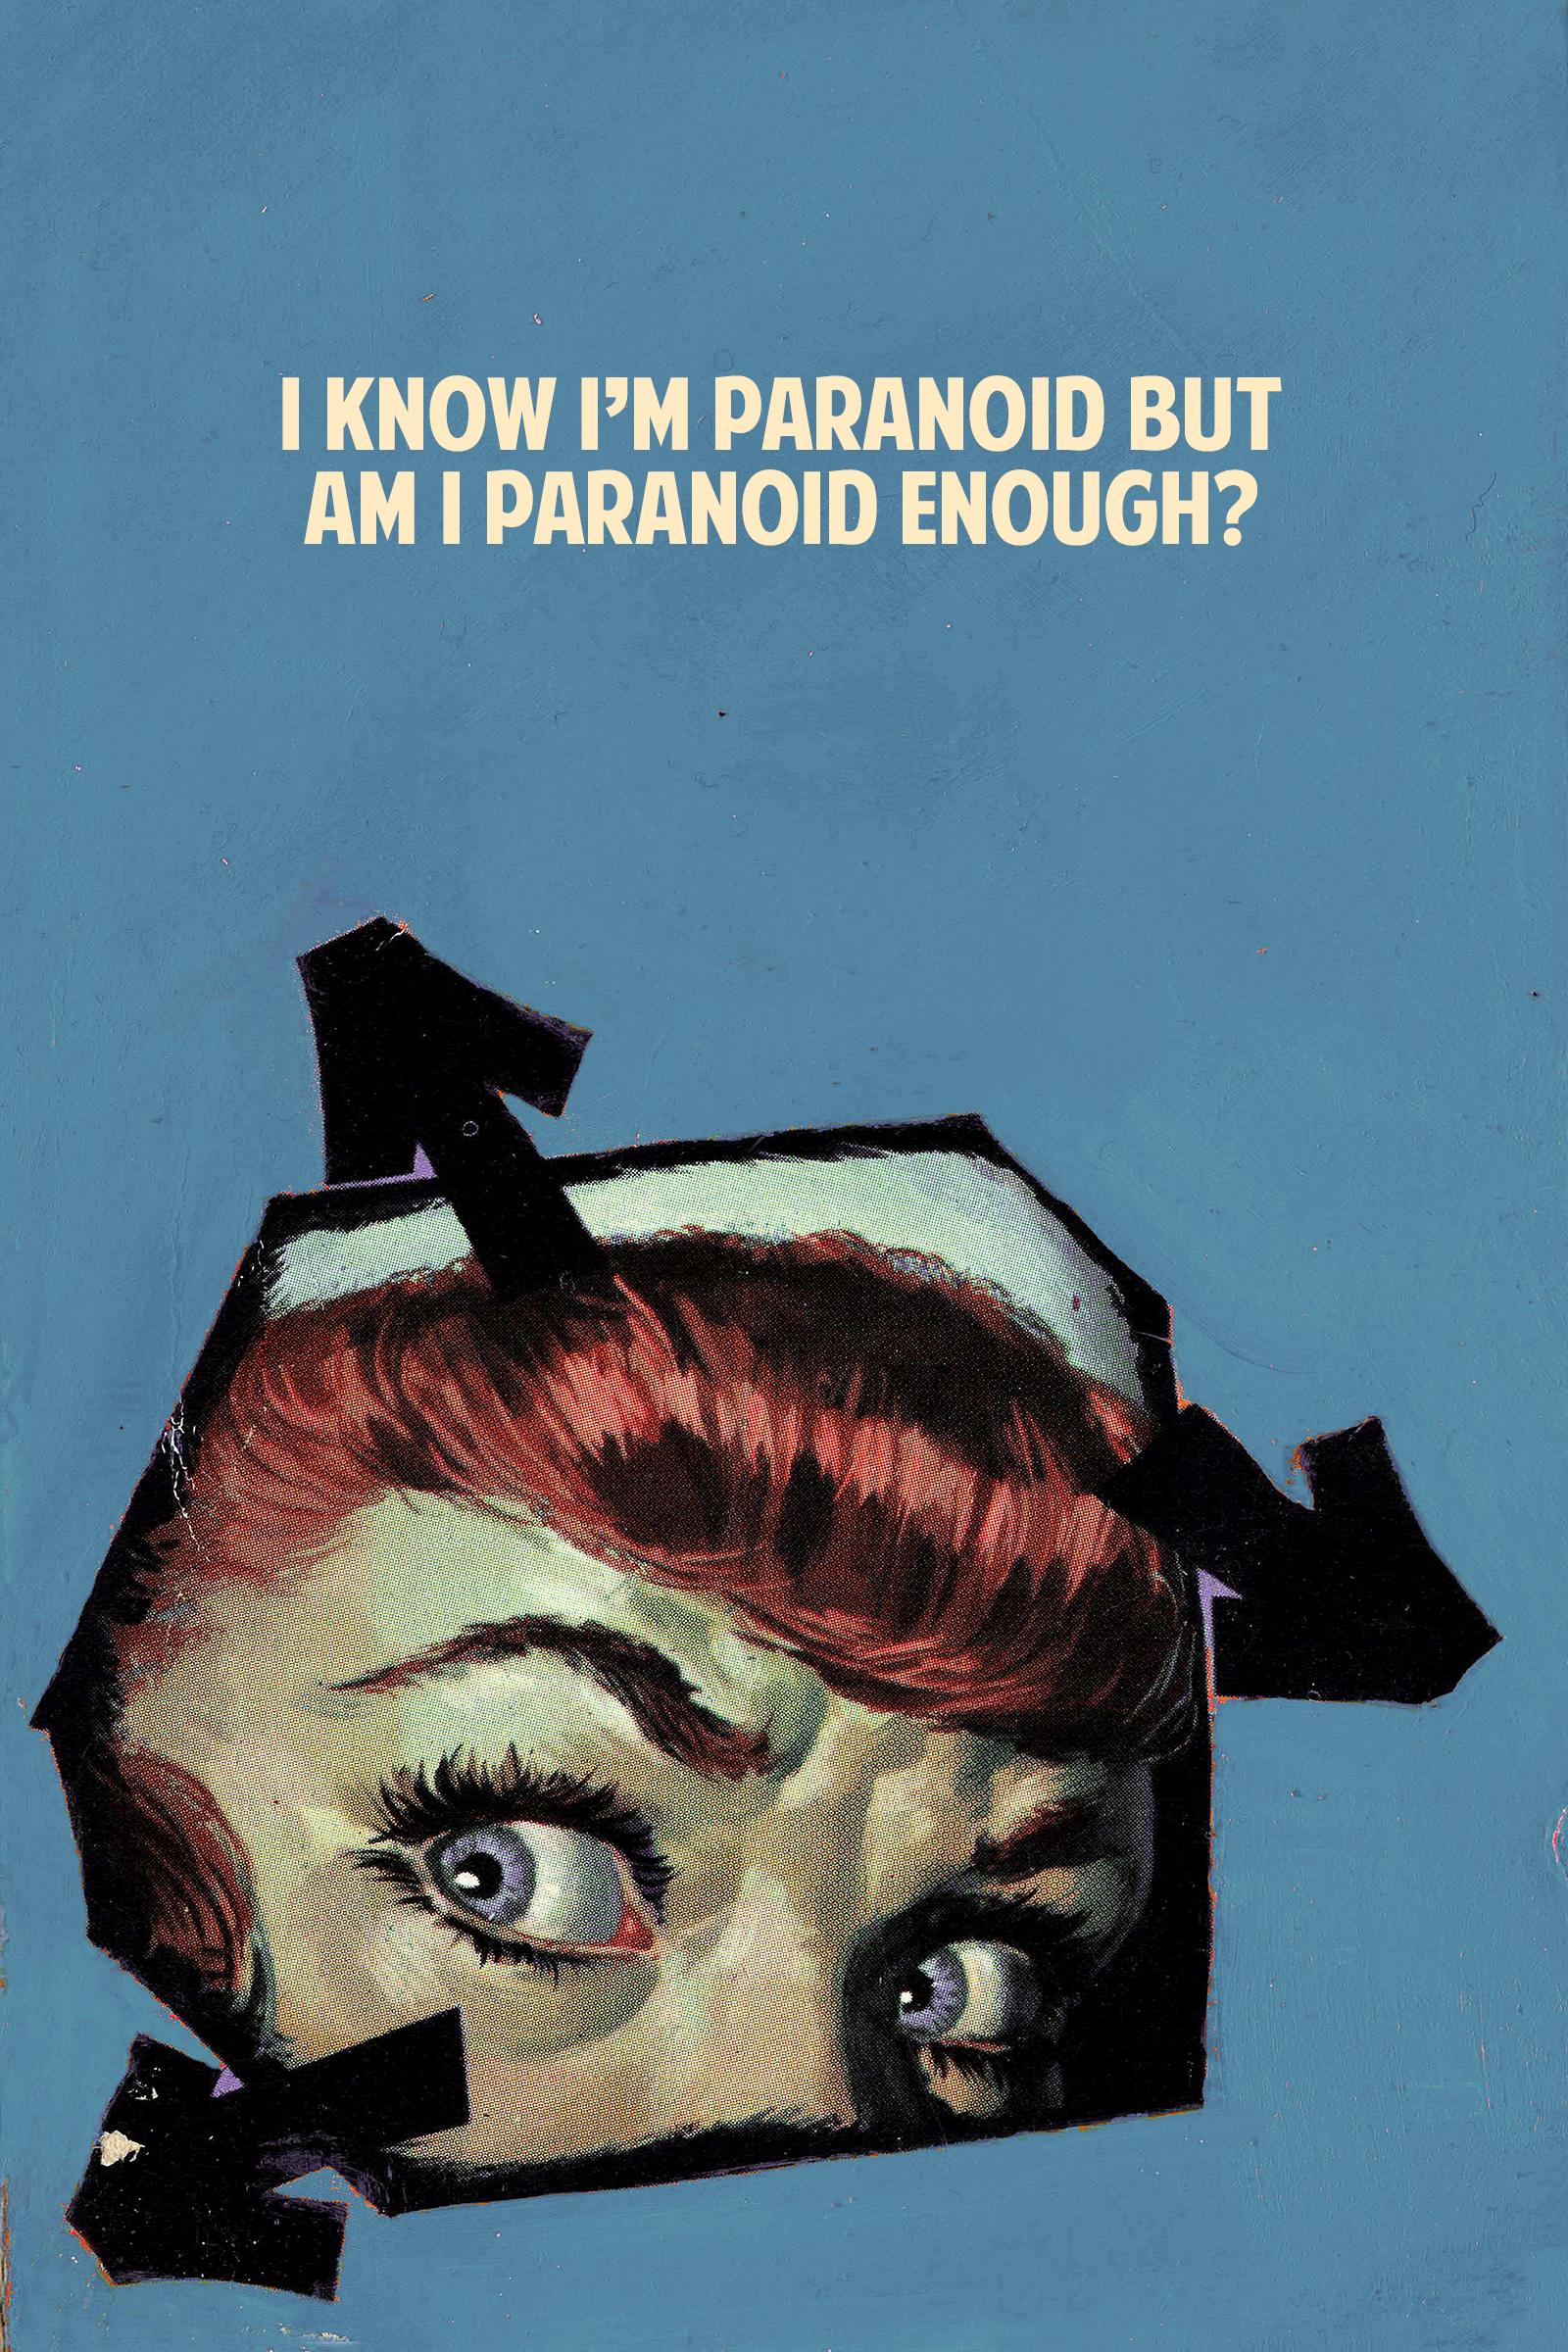 I Know I'm Paranoid by The Connor Brothers